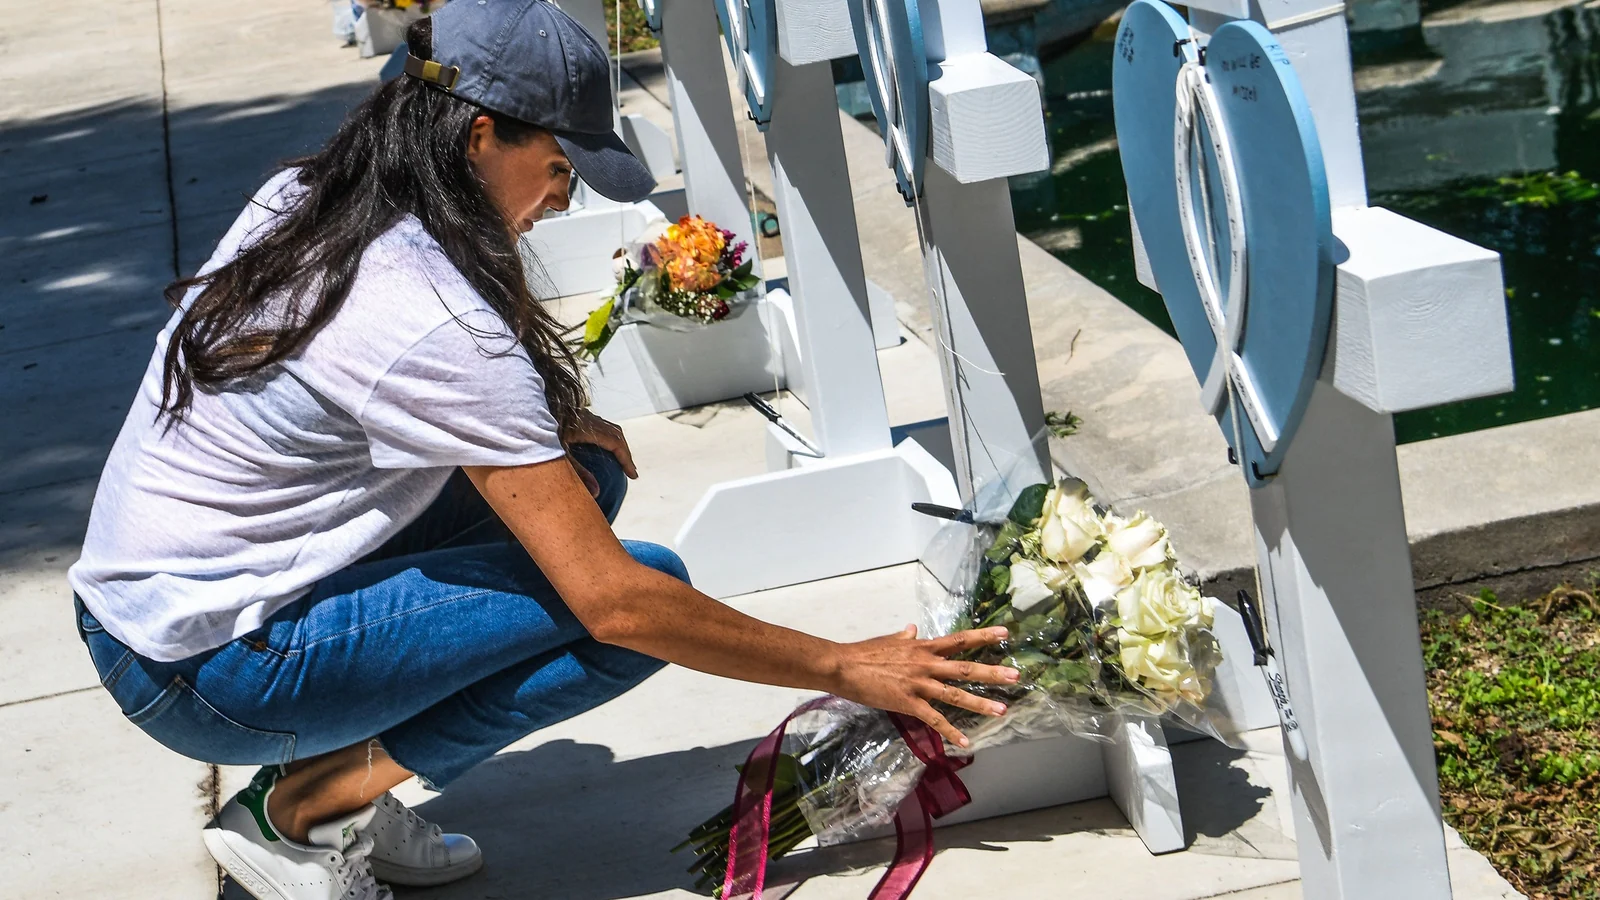 Meghan Markle visits Texas, pays respects to victims of mass shooting as a ‘mother’